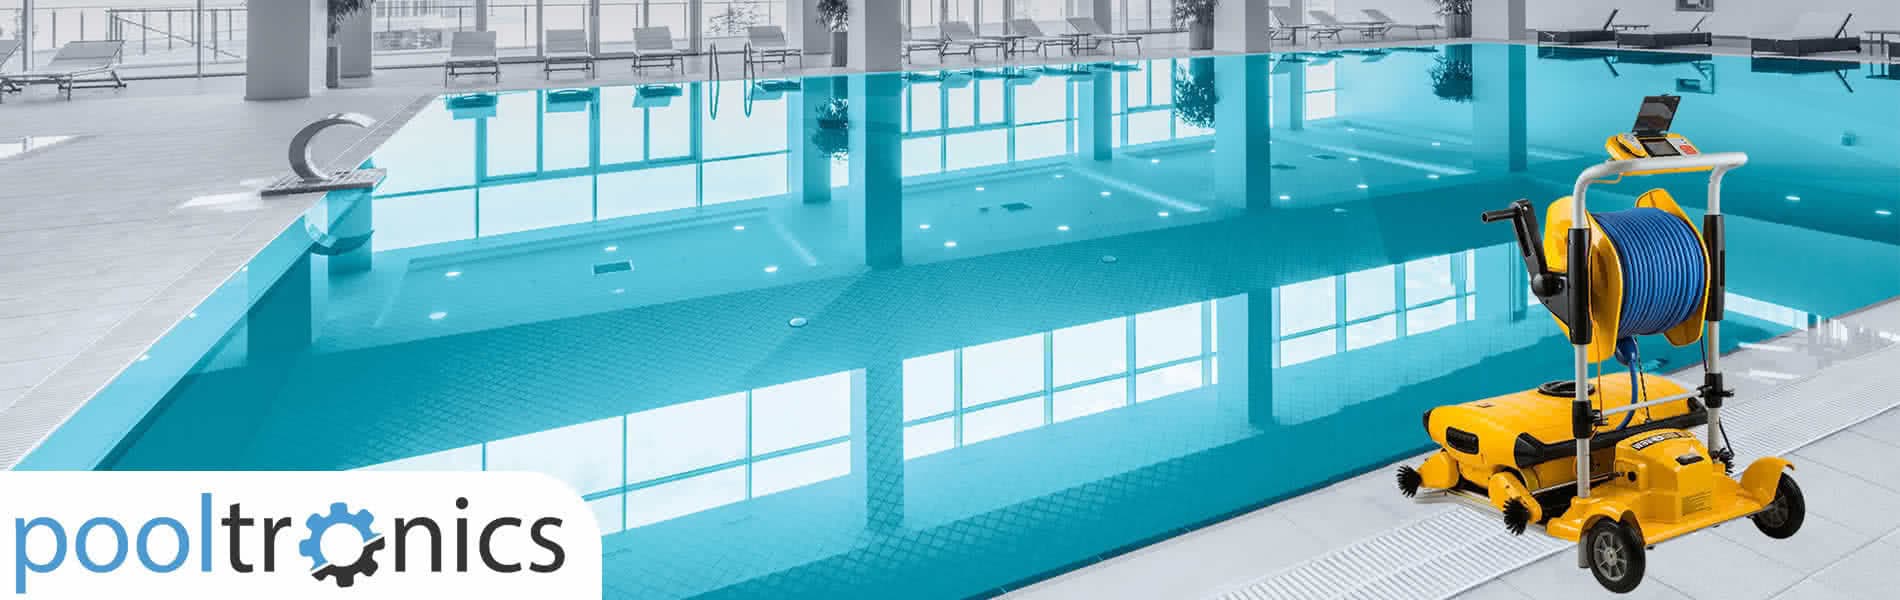 Commercial Swimming Pool Robot Cleaners